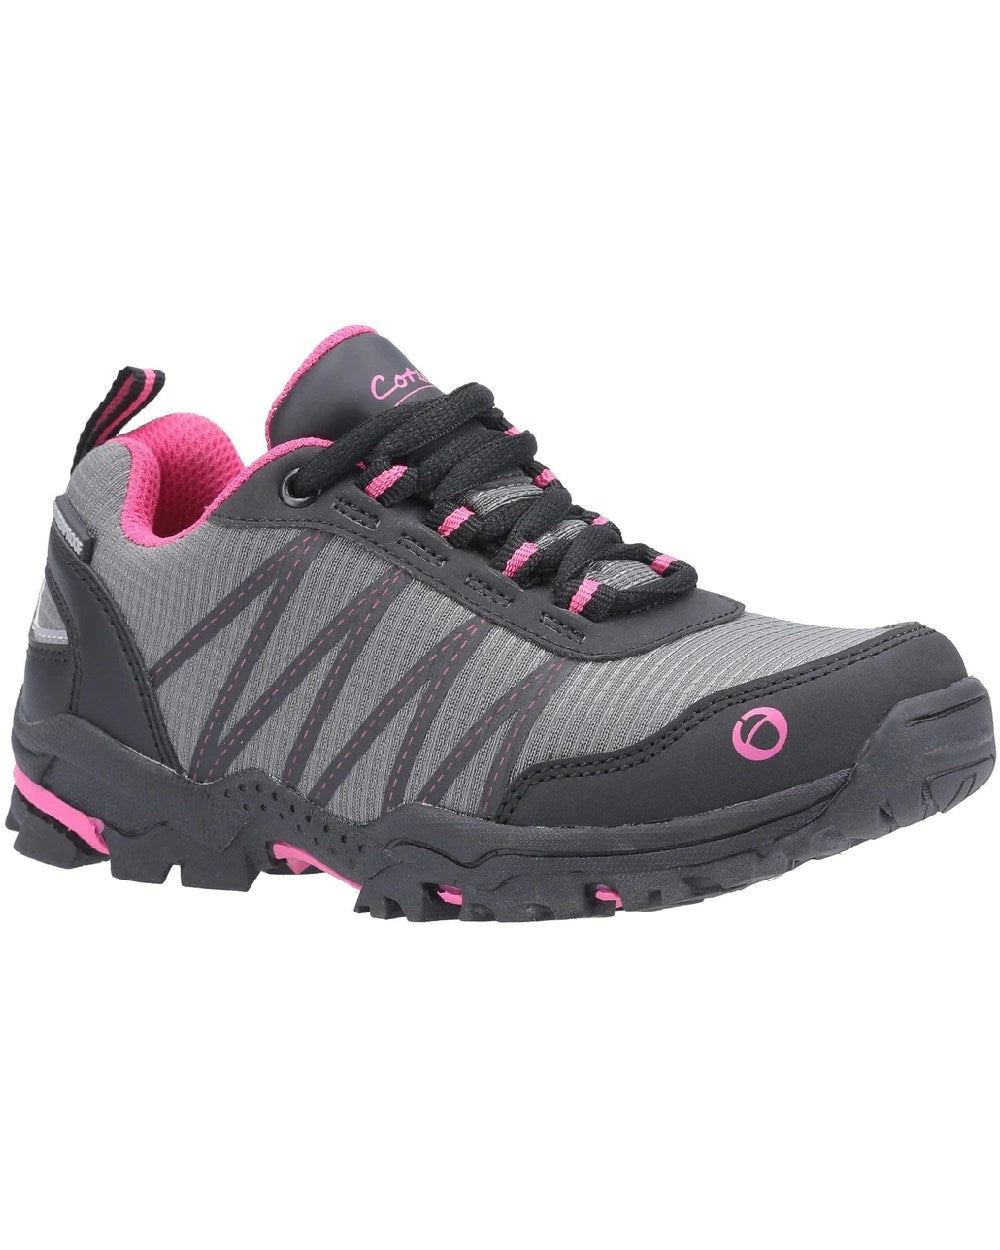 Cotswold Childrens Littledean Hiking Waterproof Shoes in Pink 